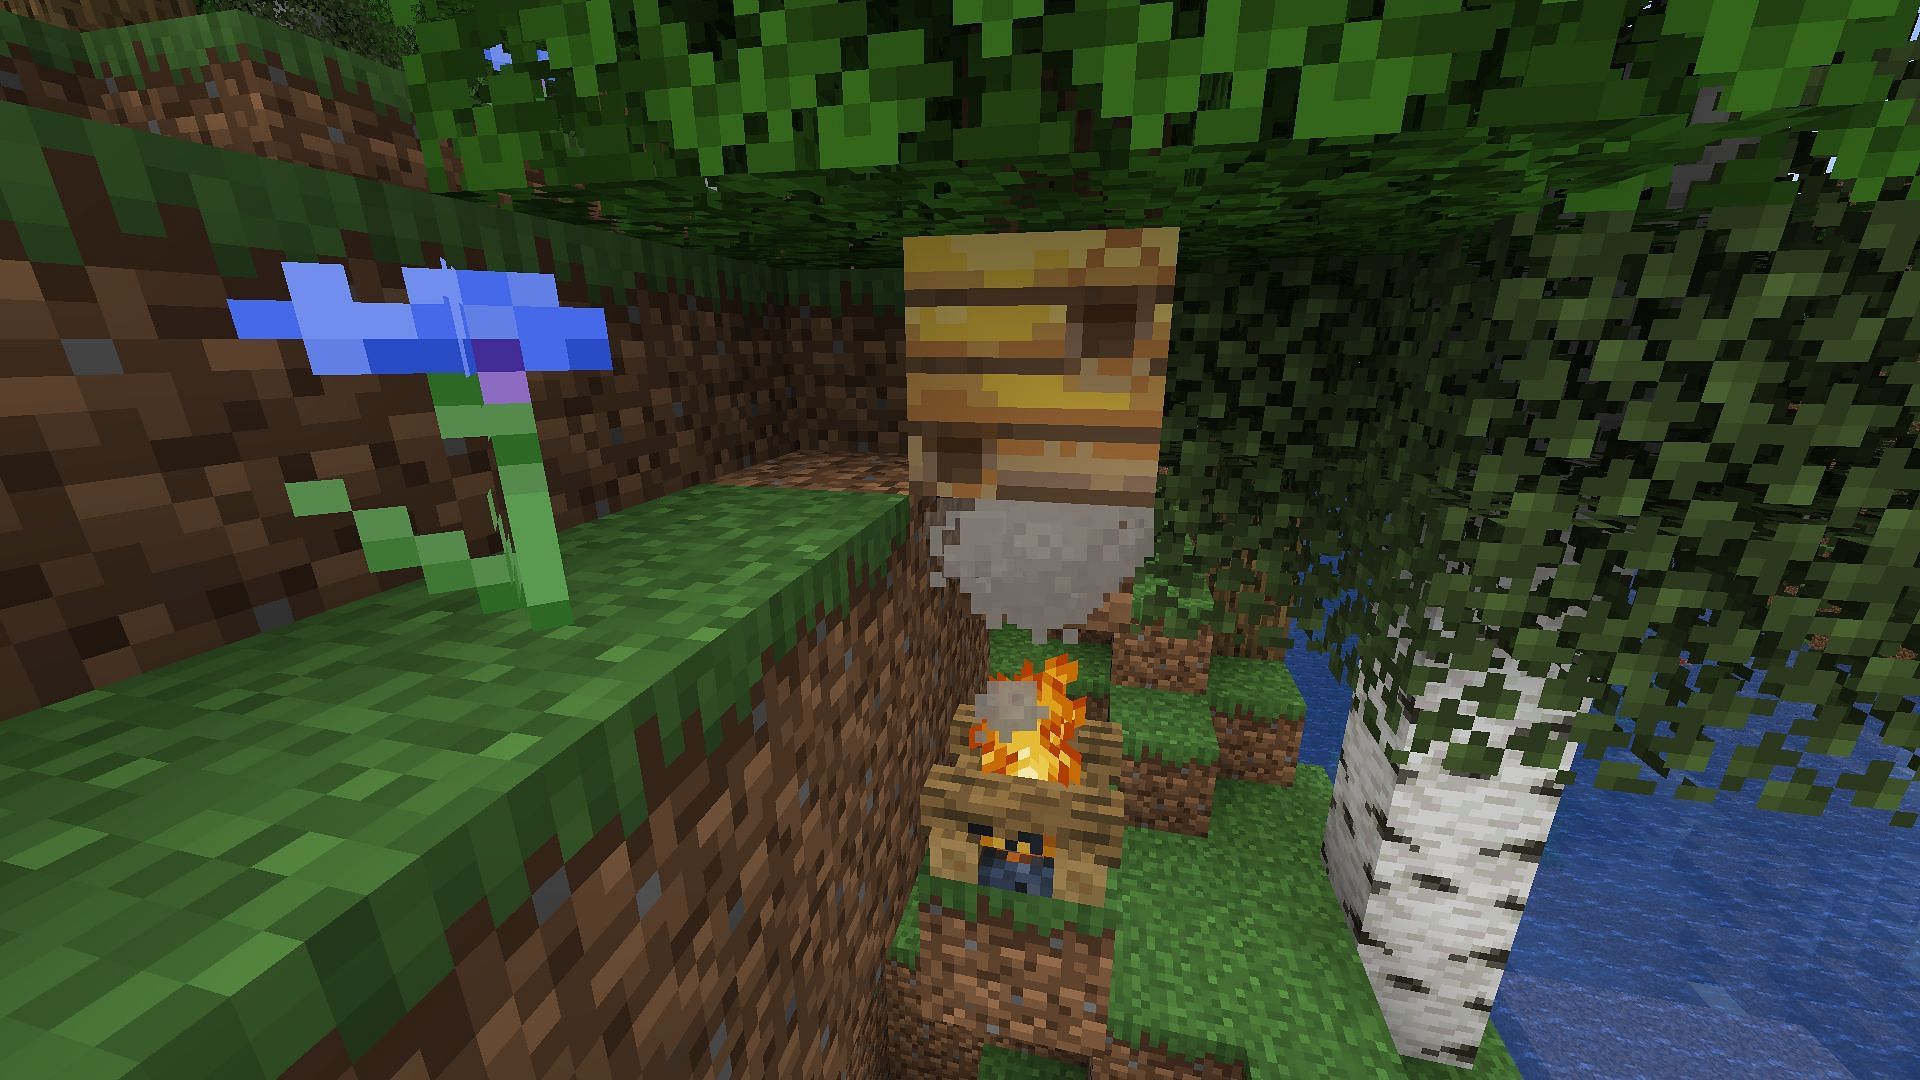 Honeycomb can be obtained by shearing bee nests or hives in Minecraft (Image via Mojang)